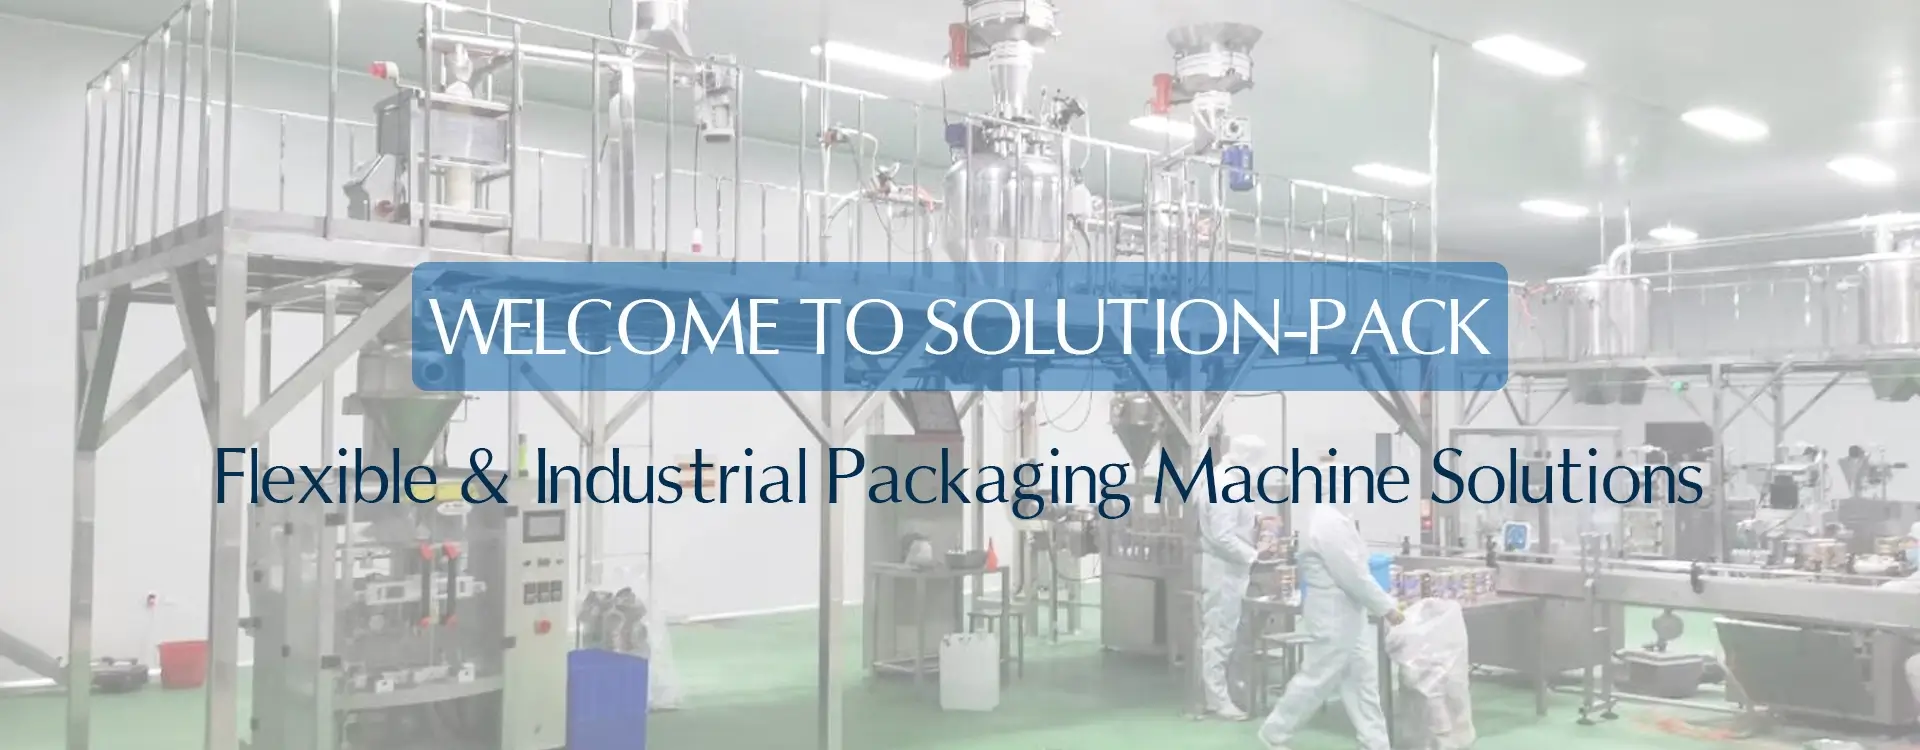 Model VSP520P Automatic Vertical Packaging Machine Unit | Solution-Pack (Middle Banner Picture)